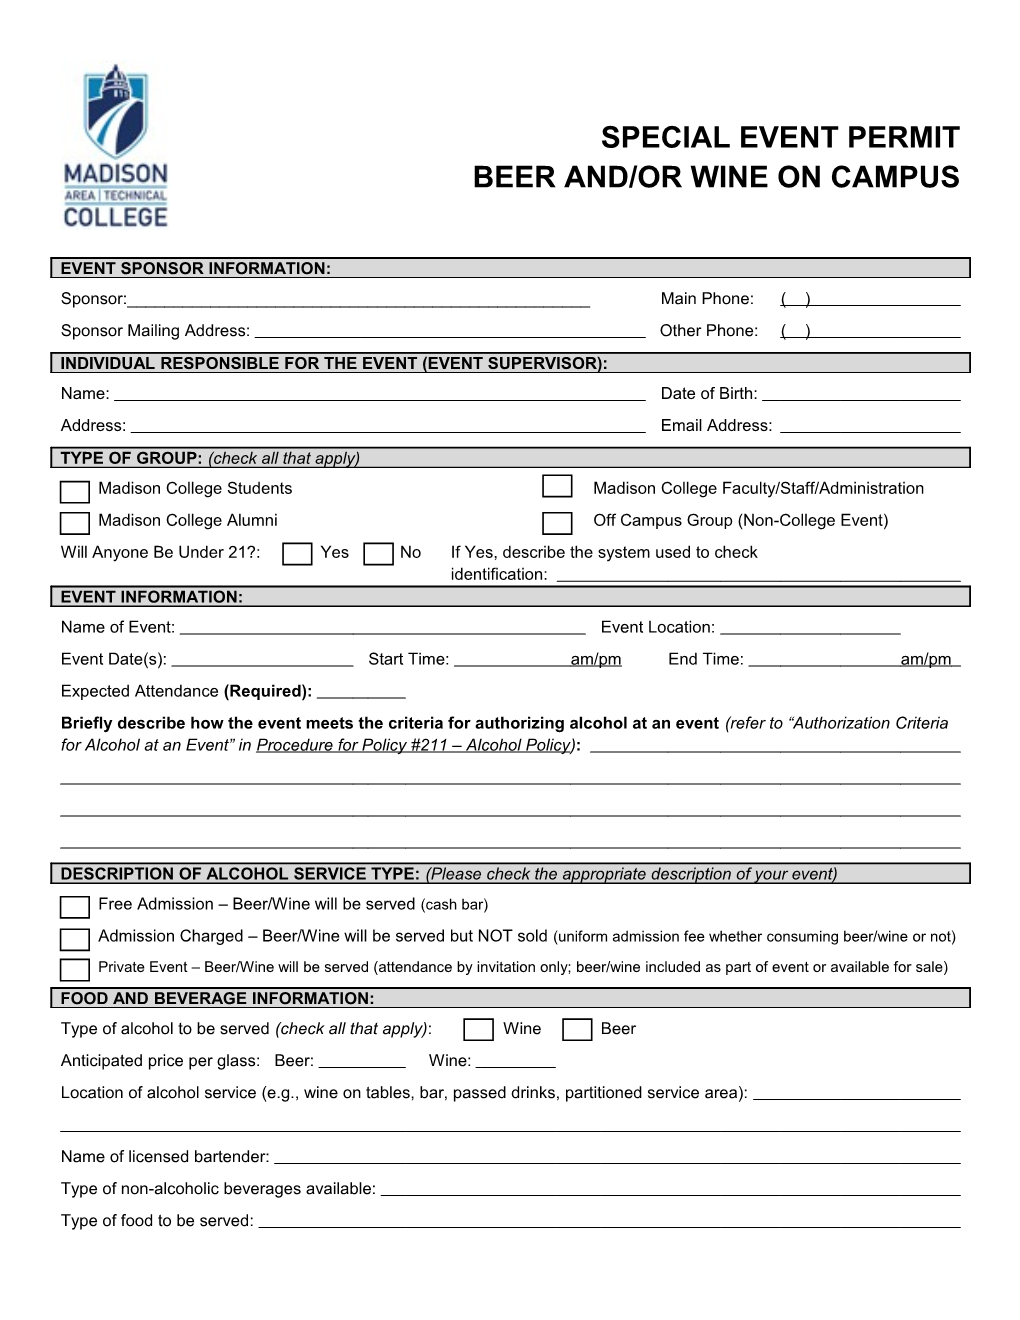 Beer And/Or Wine on Campus